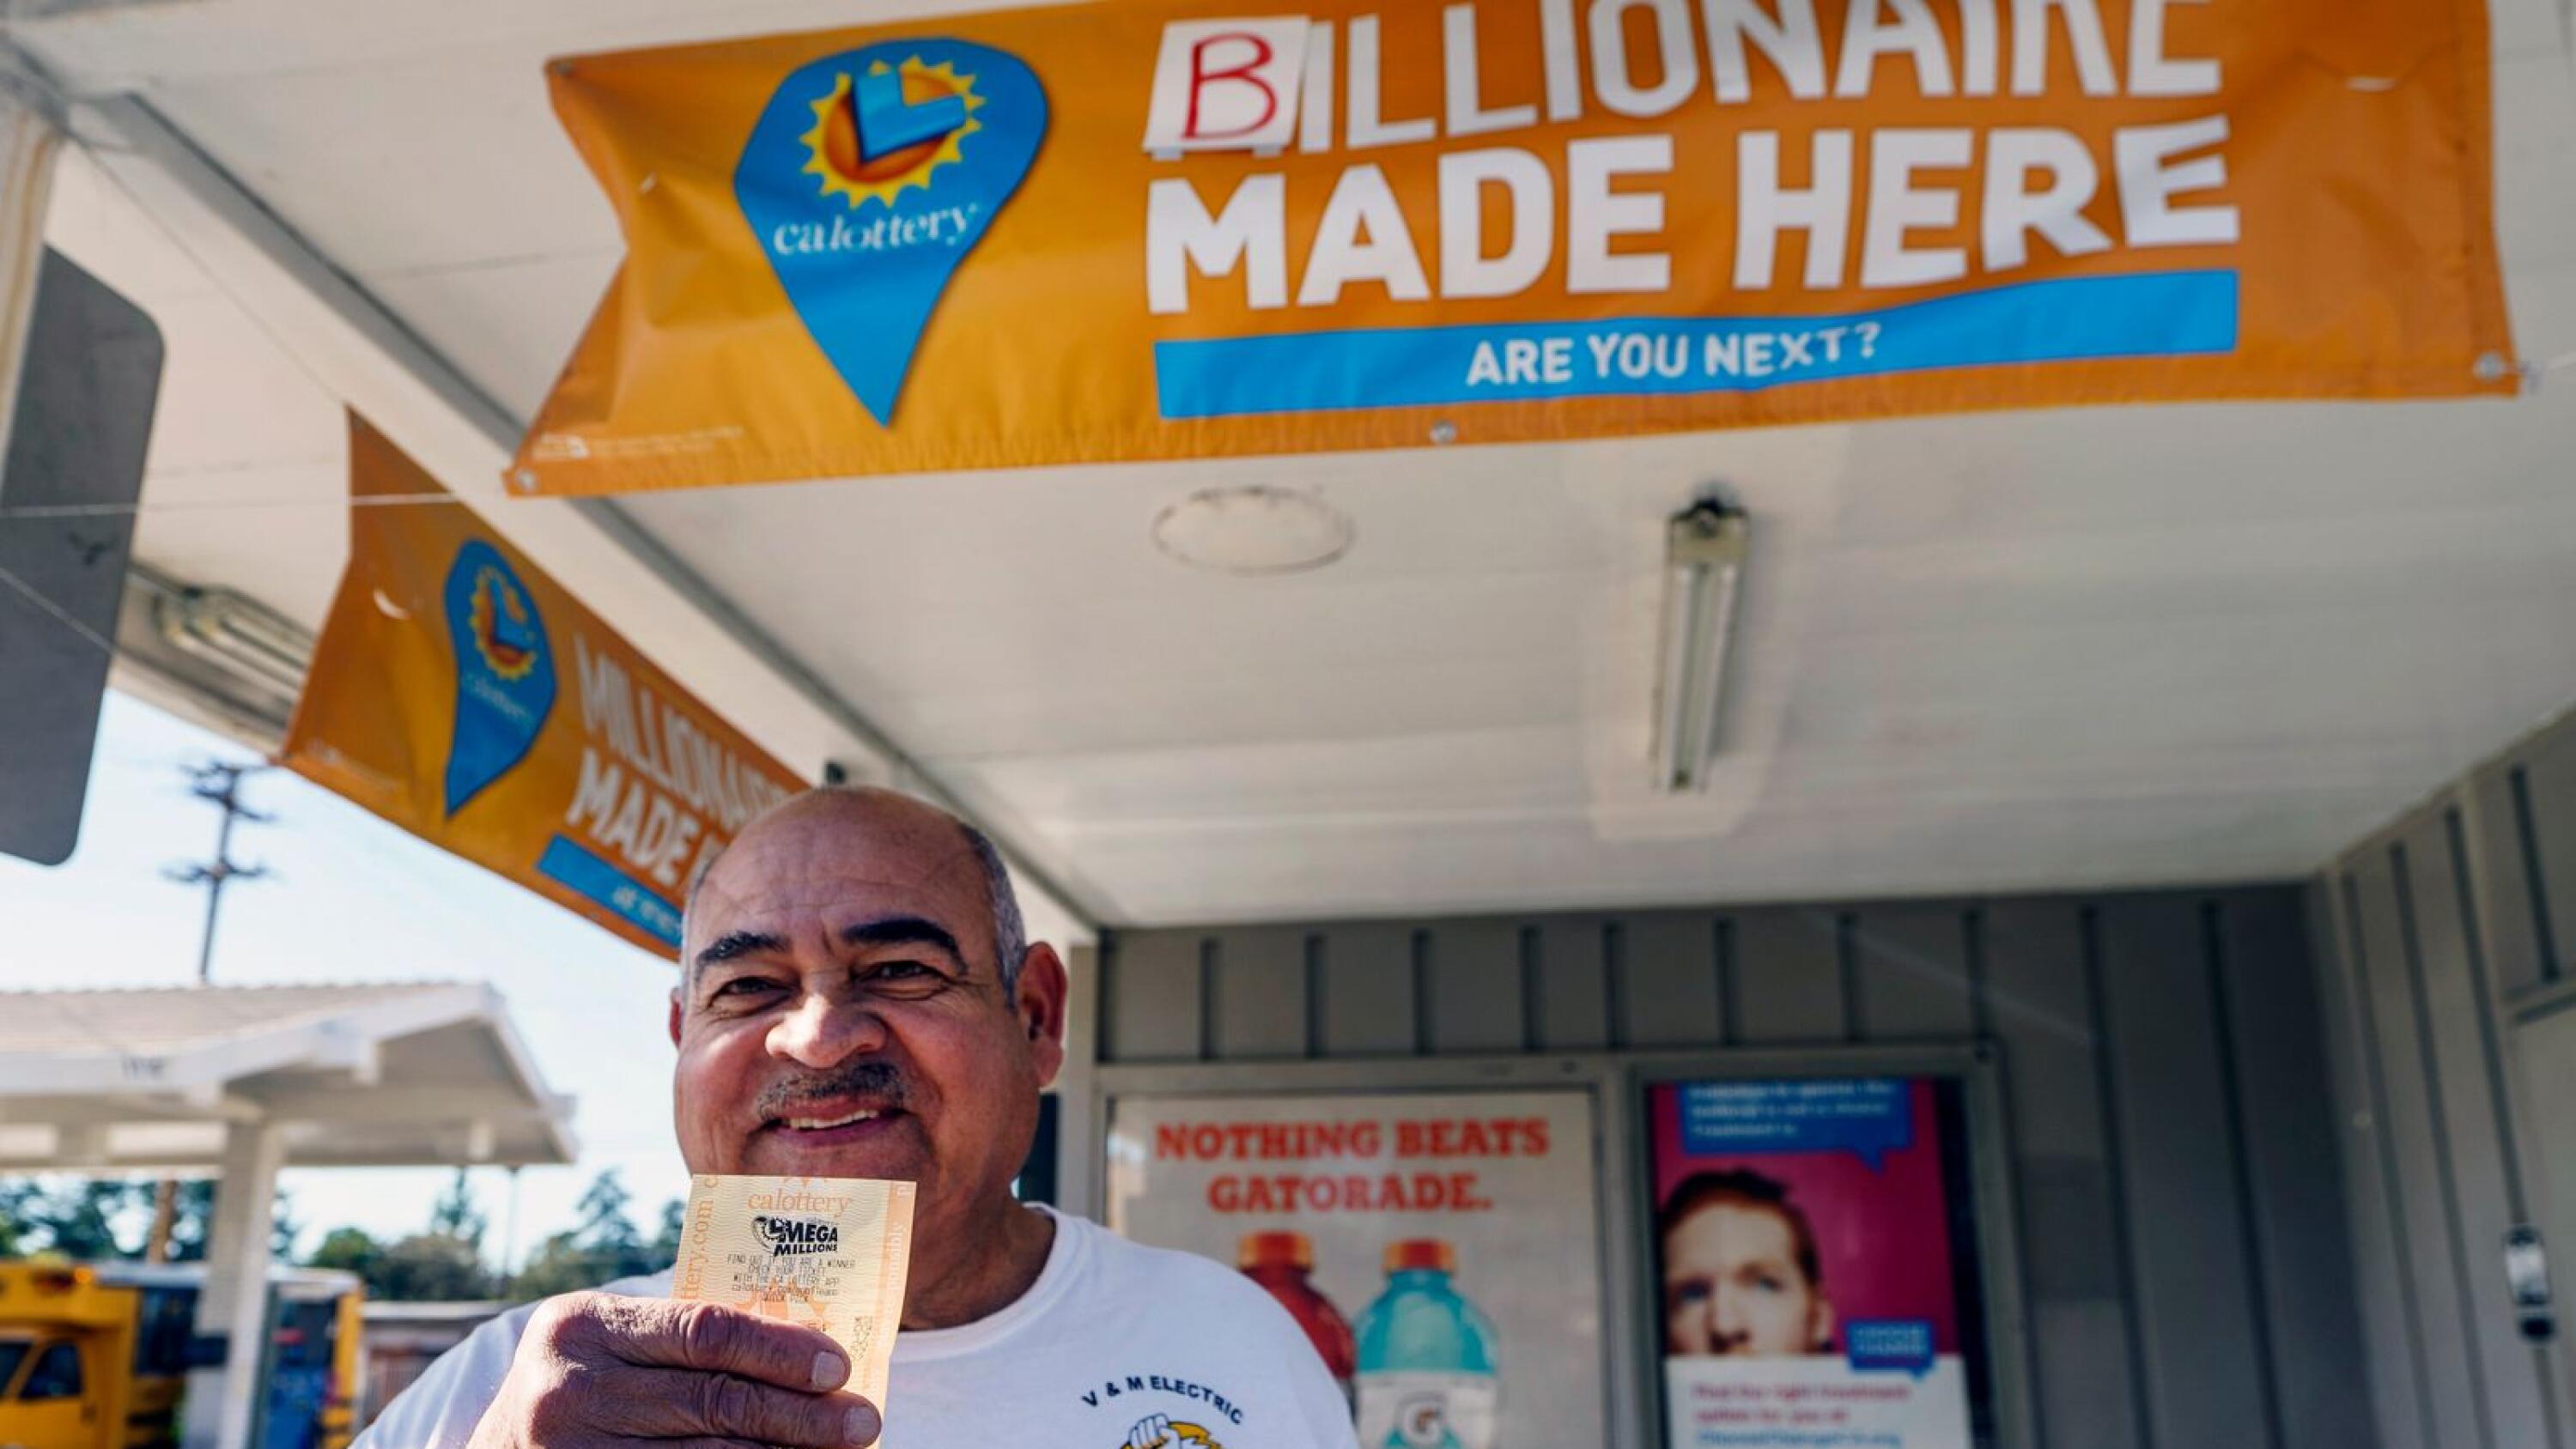 Mega Millions jackpot soars to $1.1 billion after 24 drawings with no winner